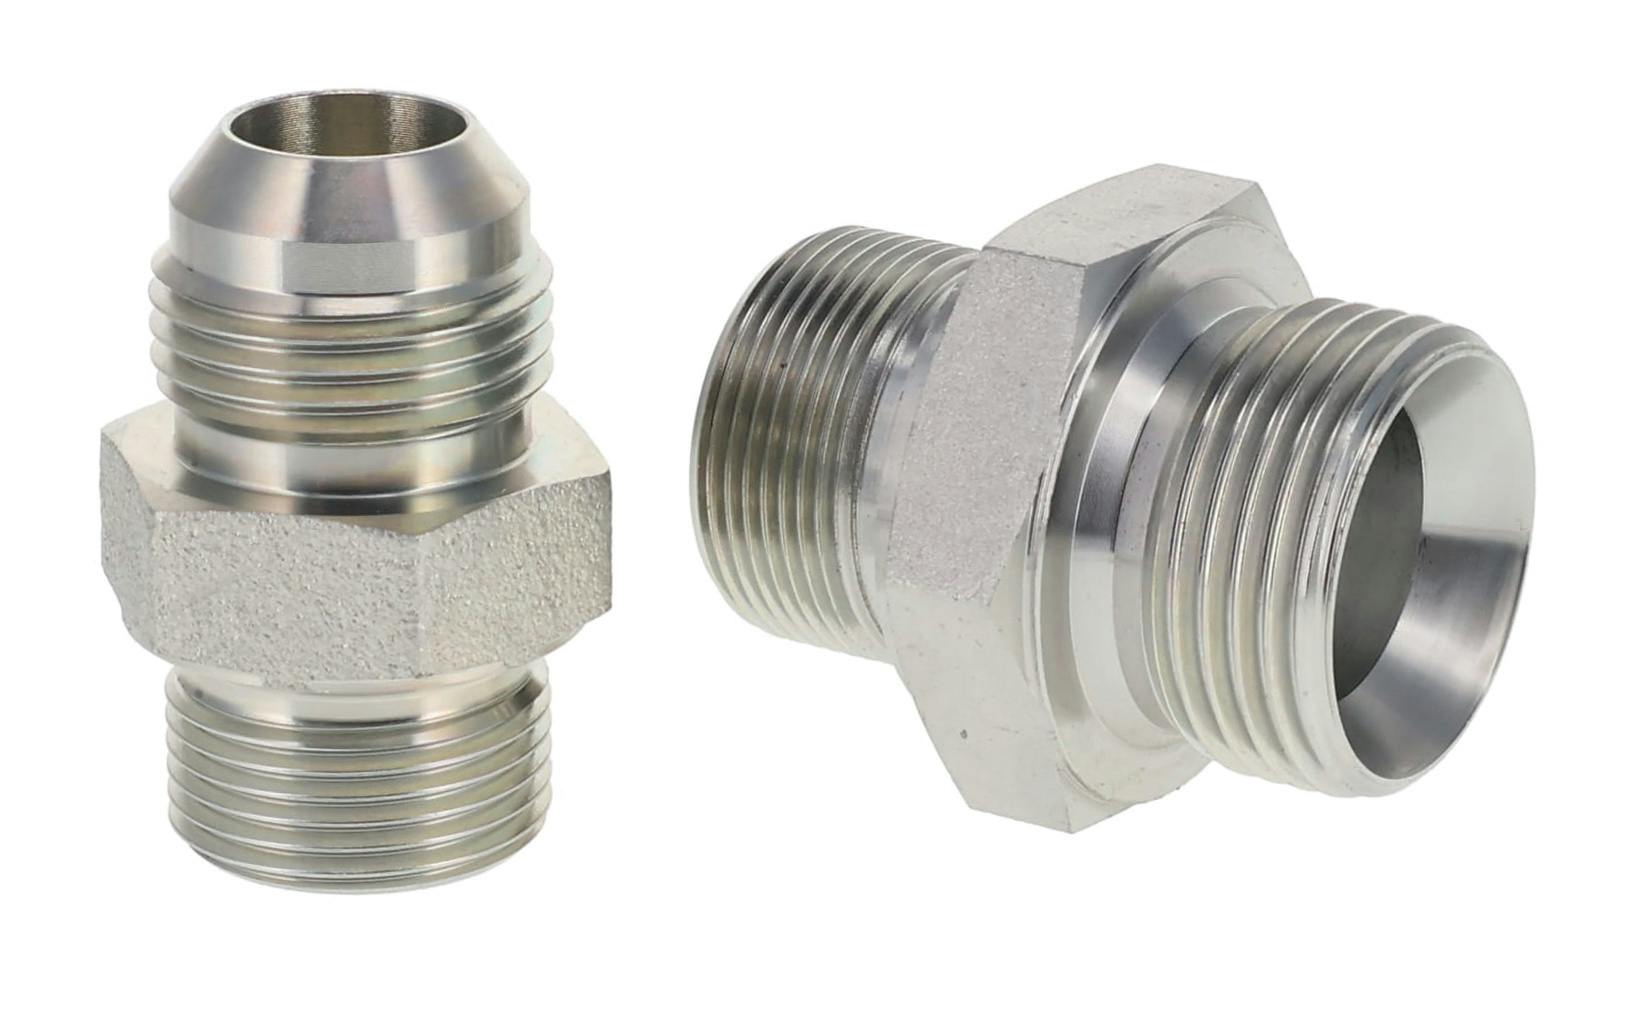 Stainless Metric Adapters